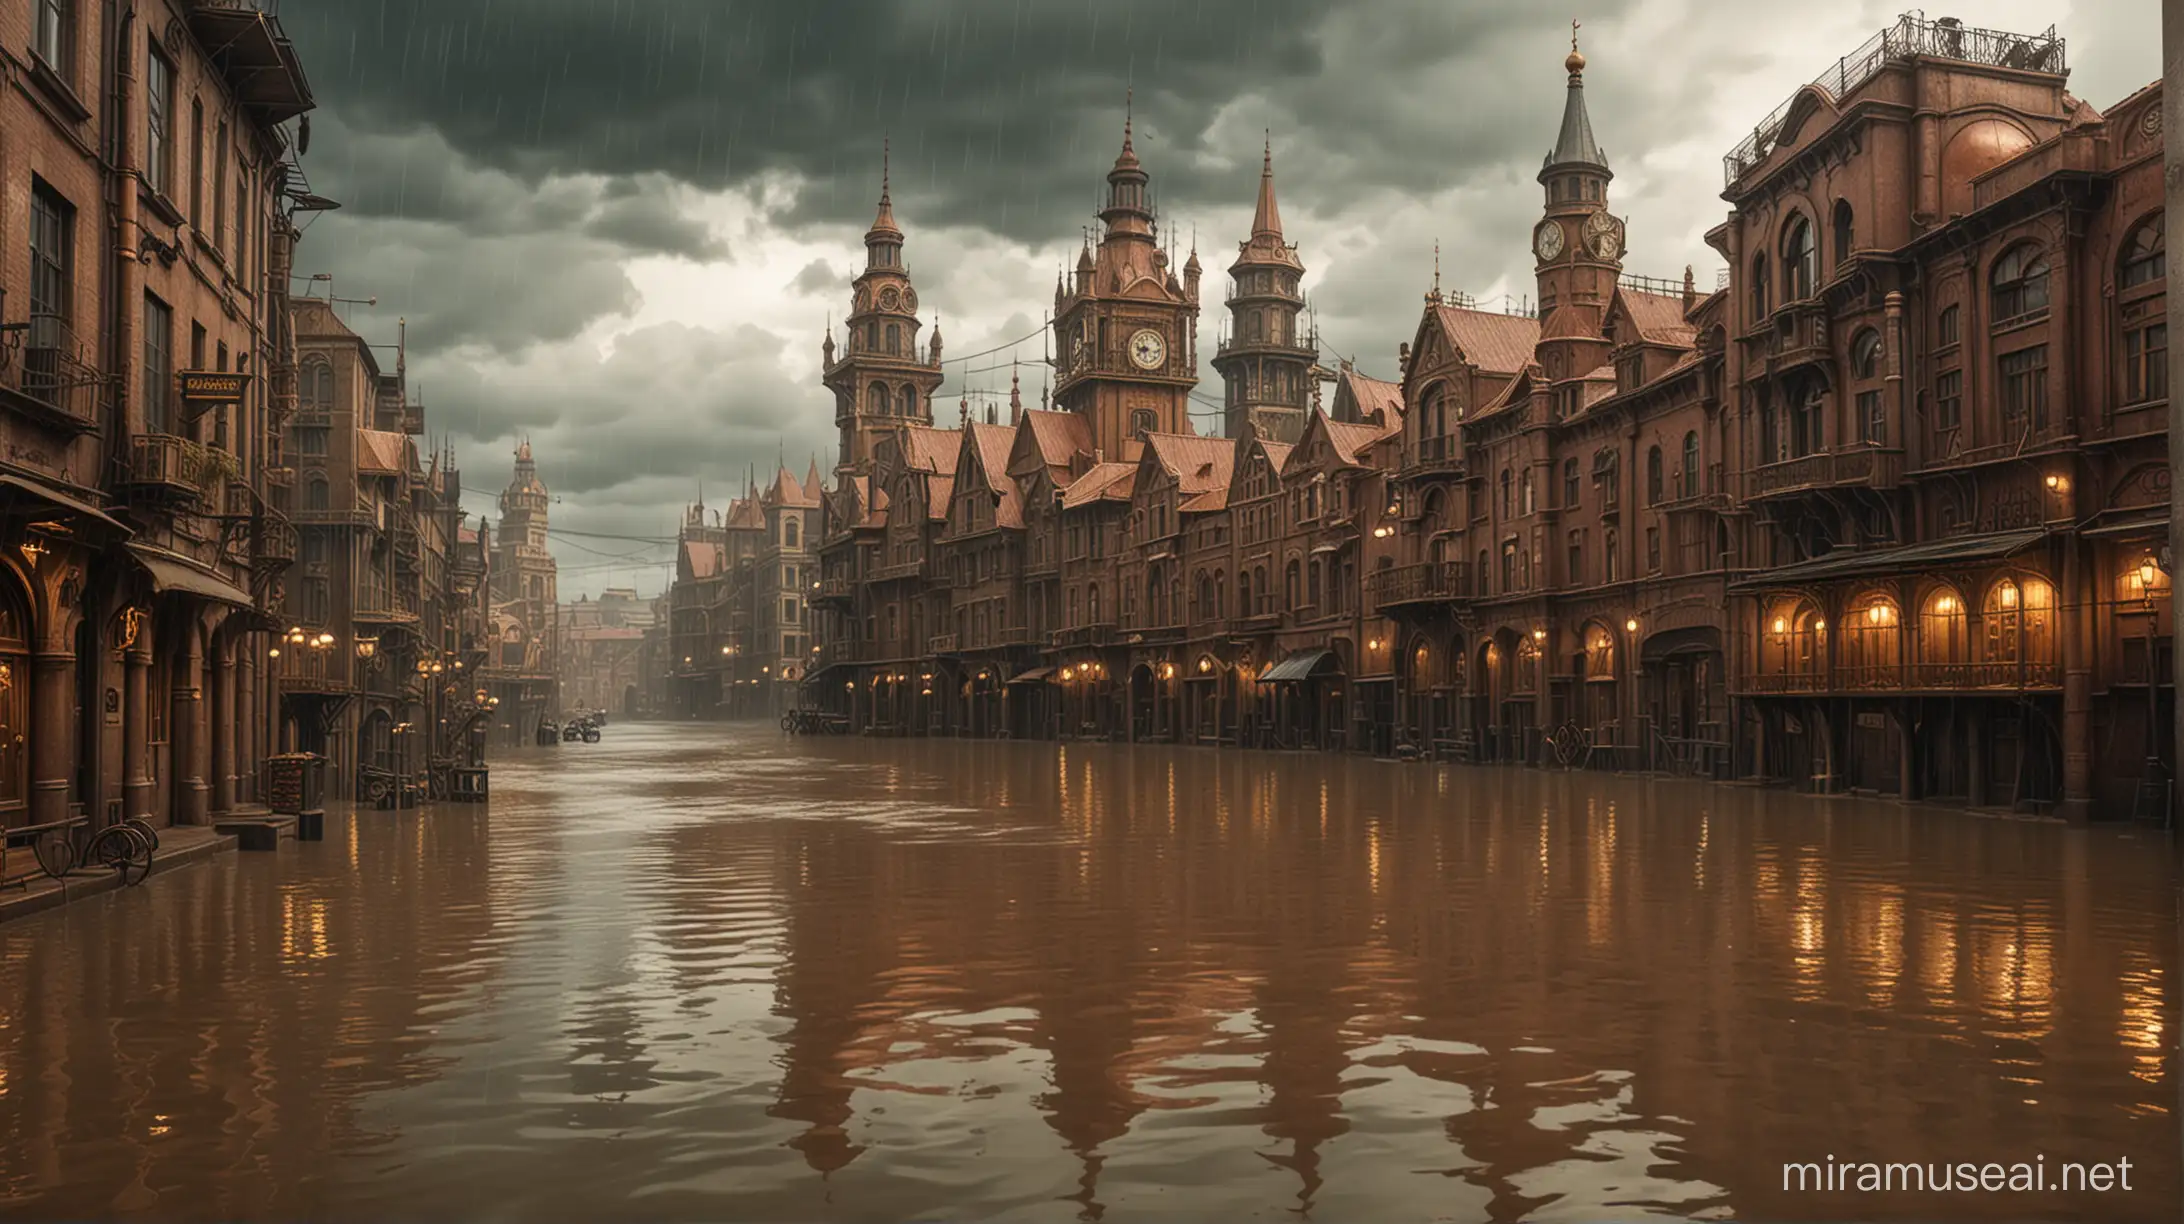 steampunk city under flood. the city is made of copper and gold. rainy and cloudy.